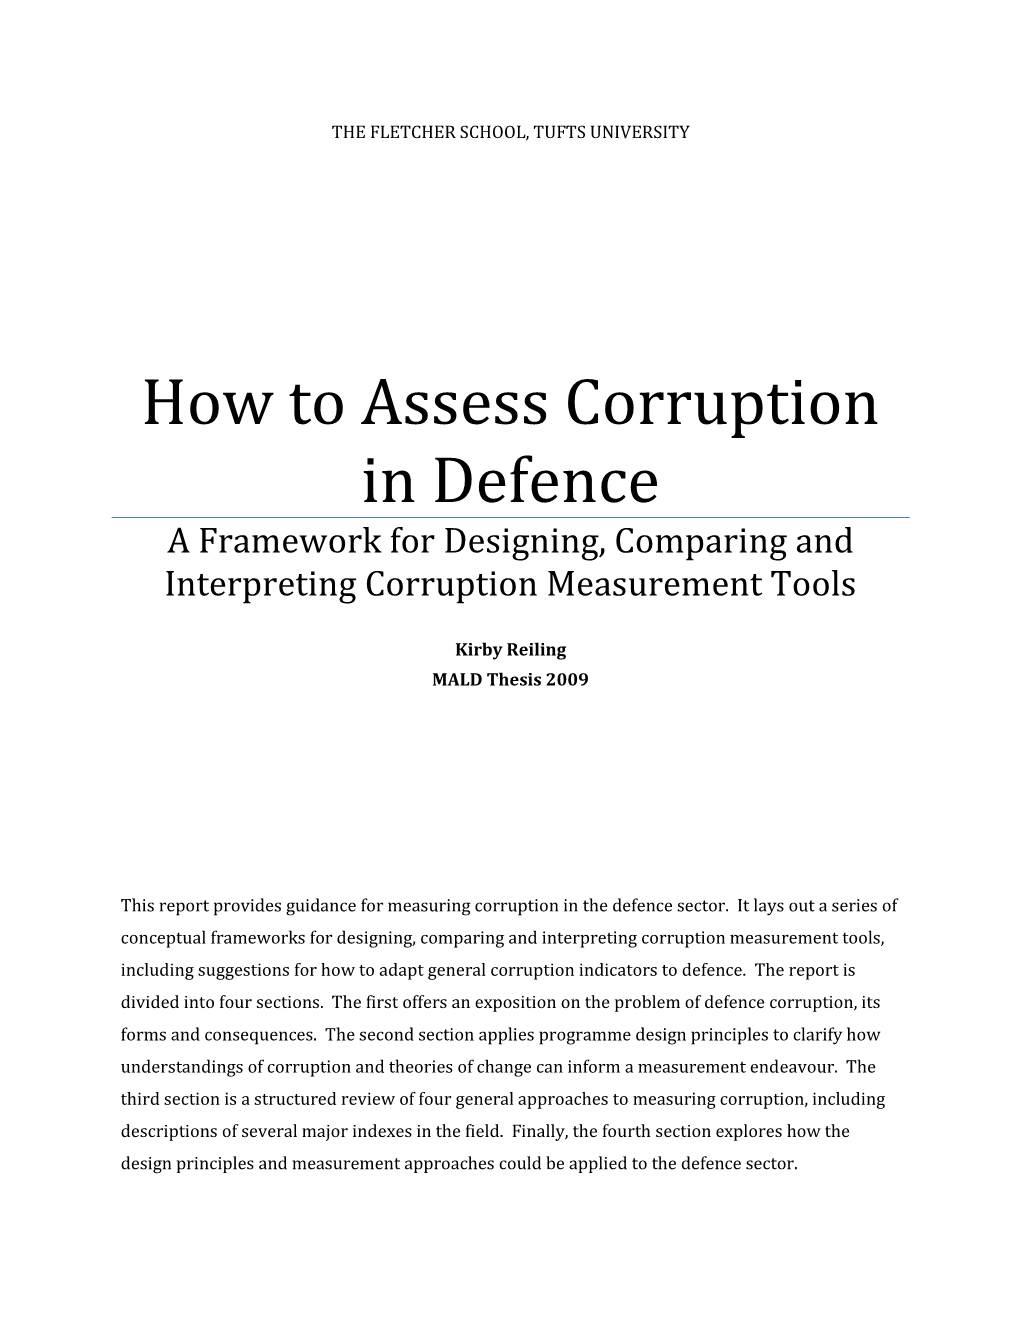 Reiling 2009 How to Assess Corruption In